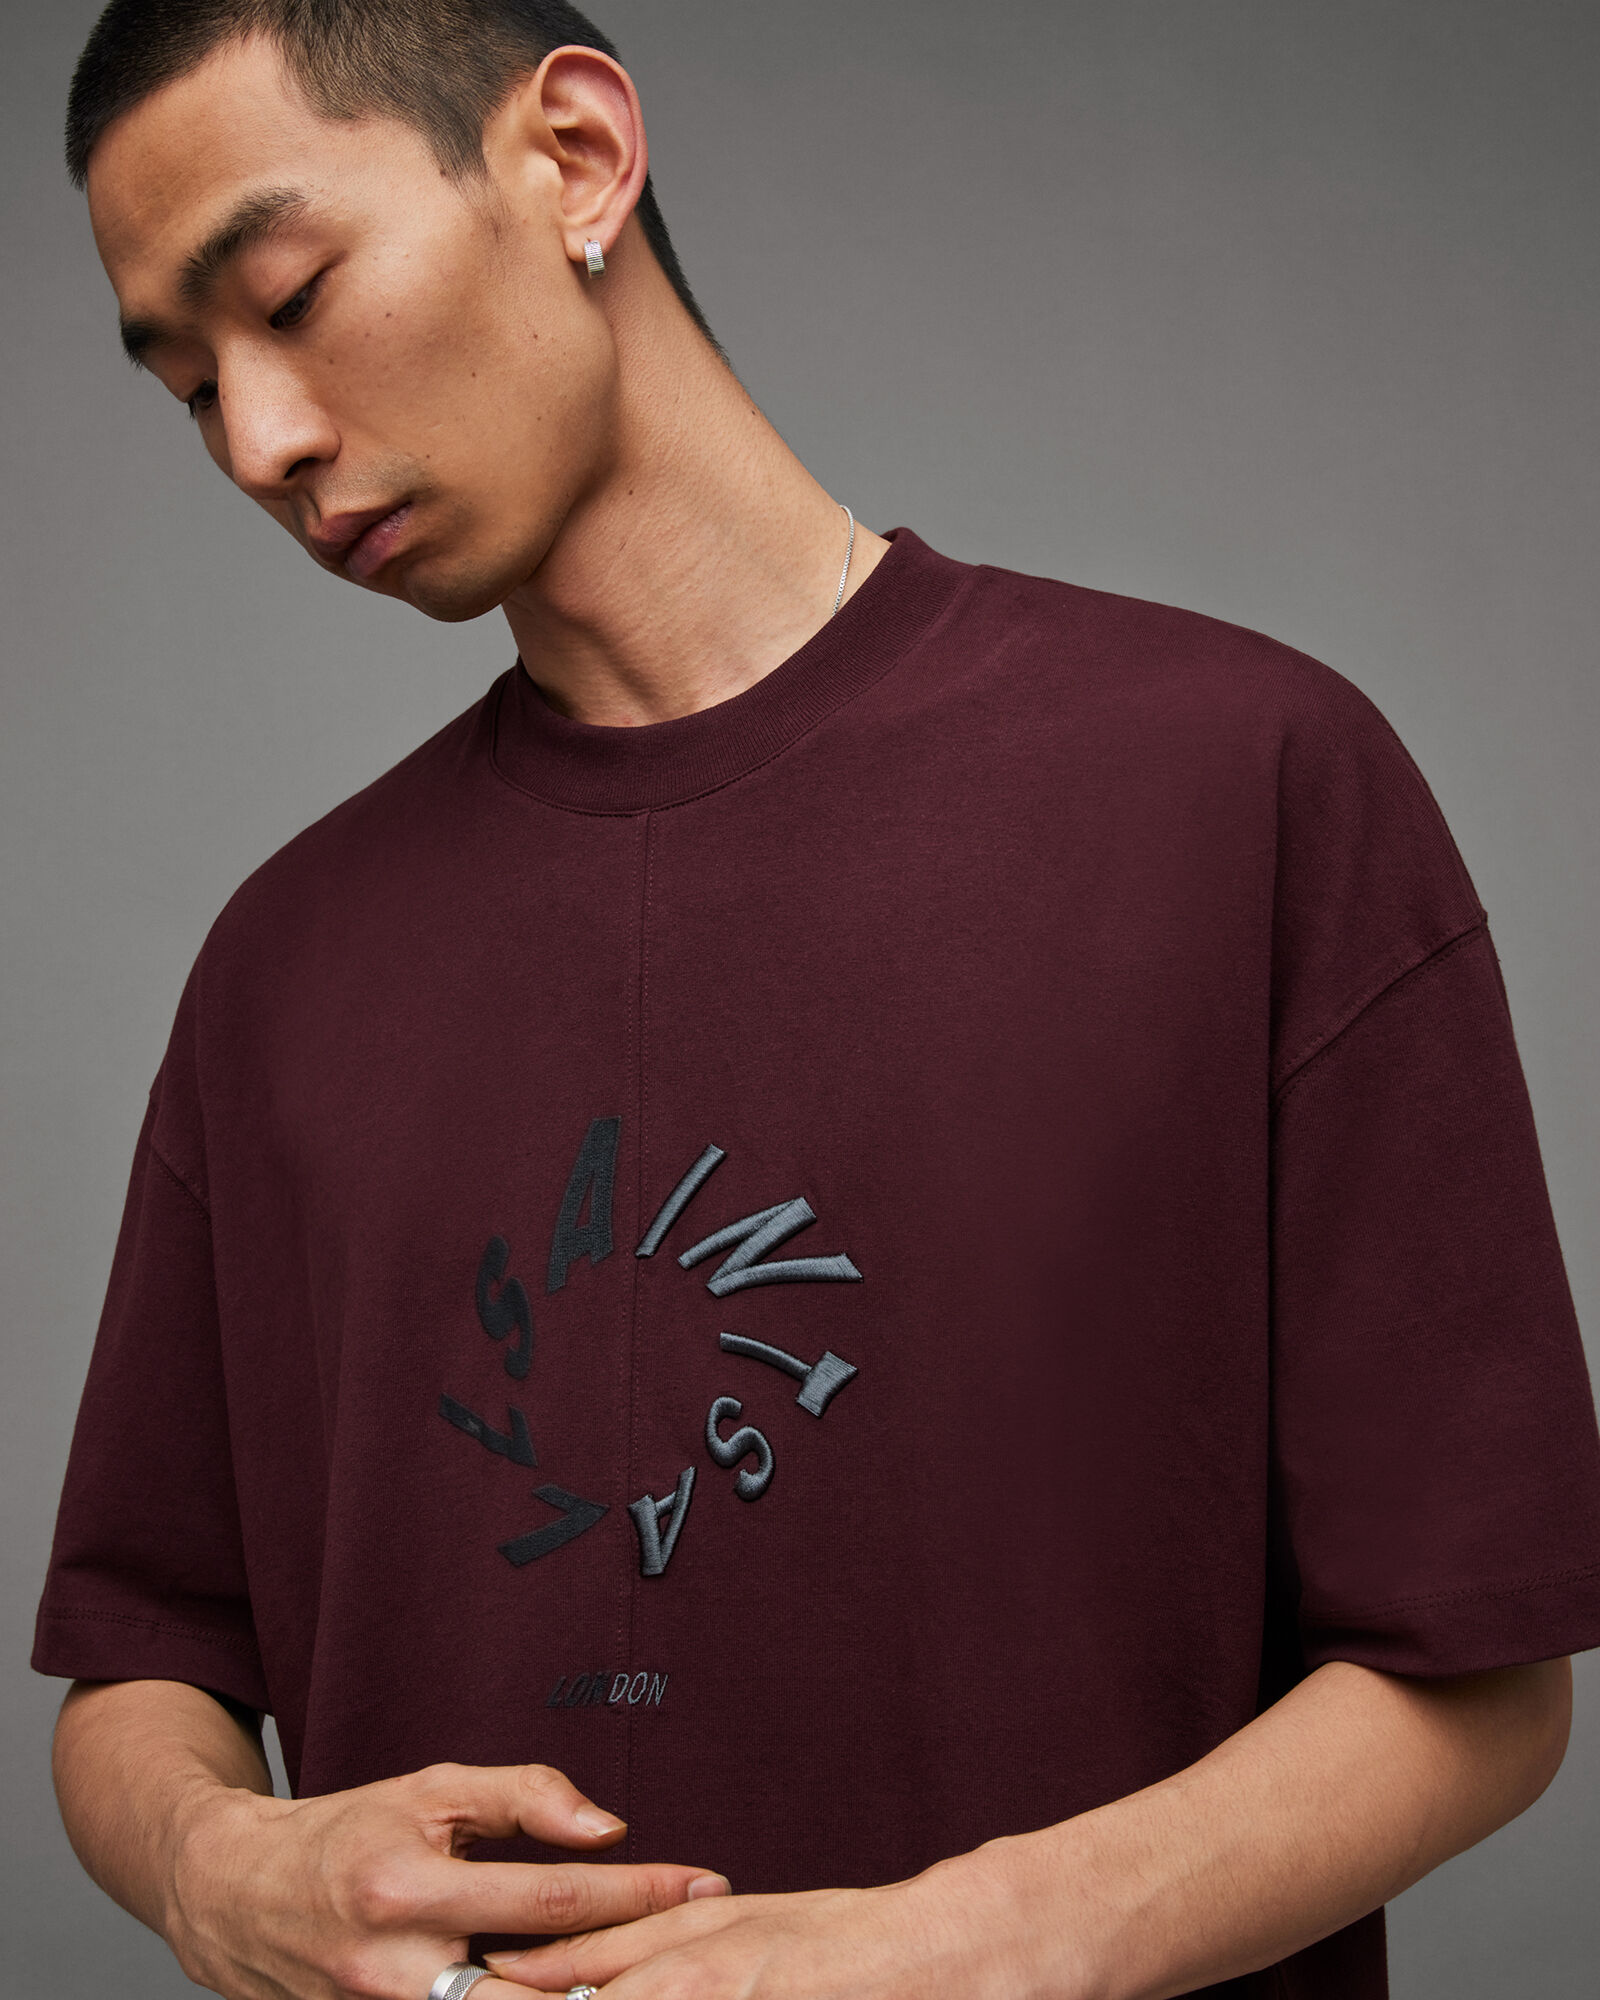 mt8484-One arm patterned switching design T-Shirt Tシャツ-